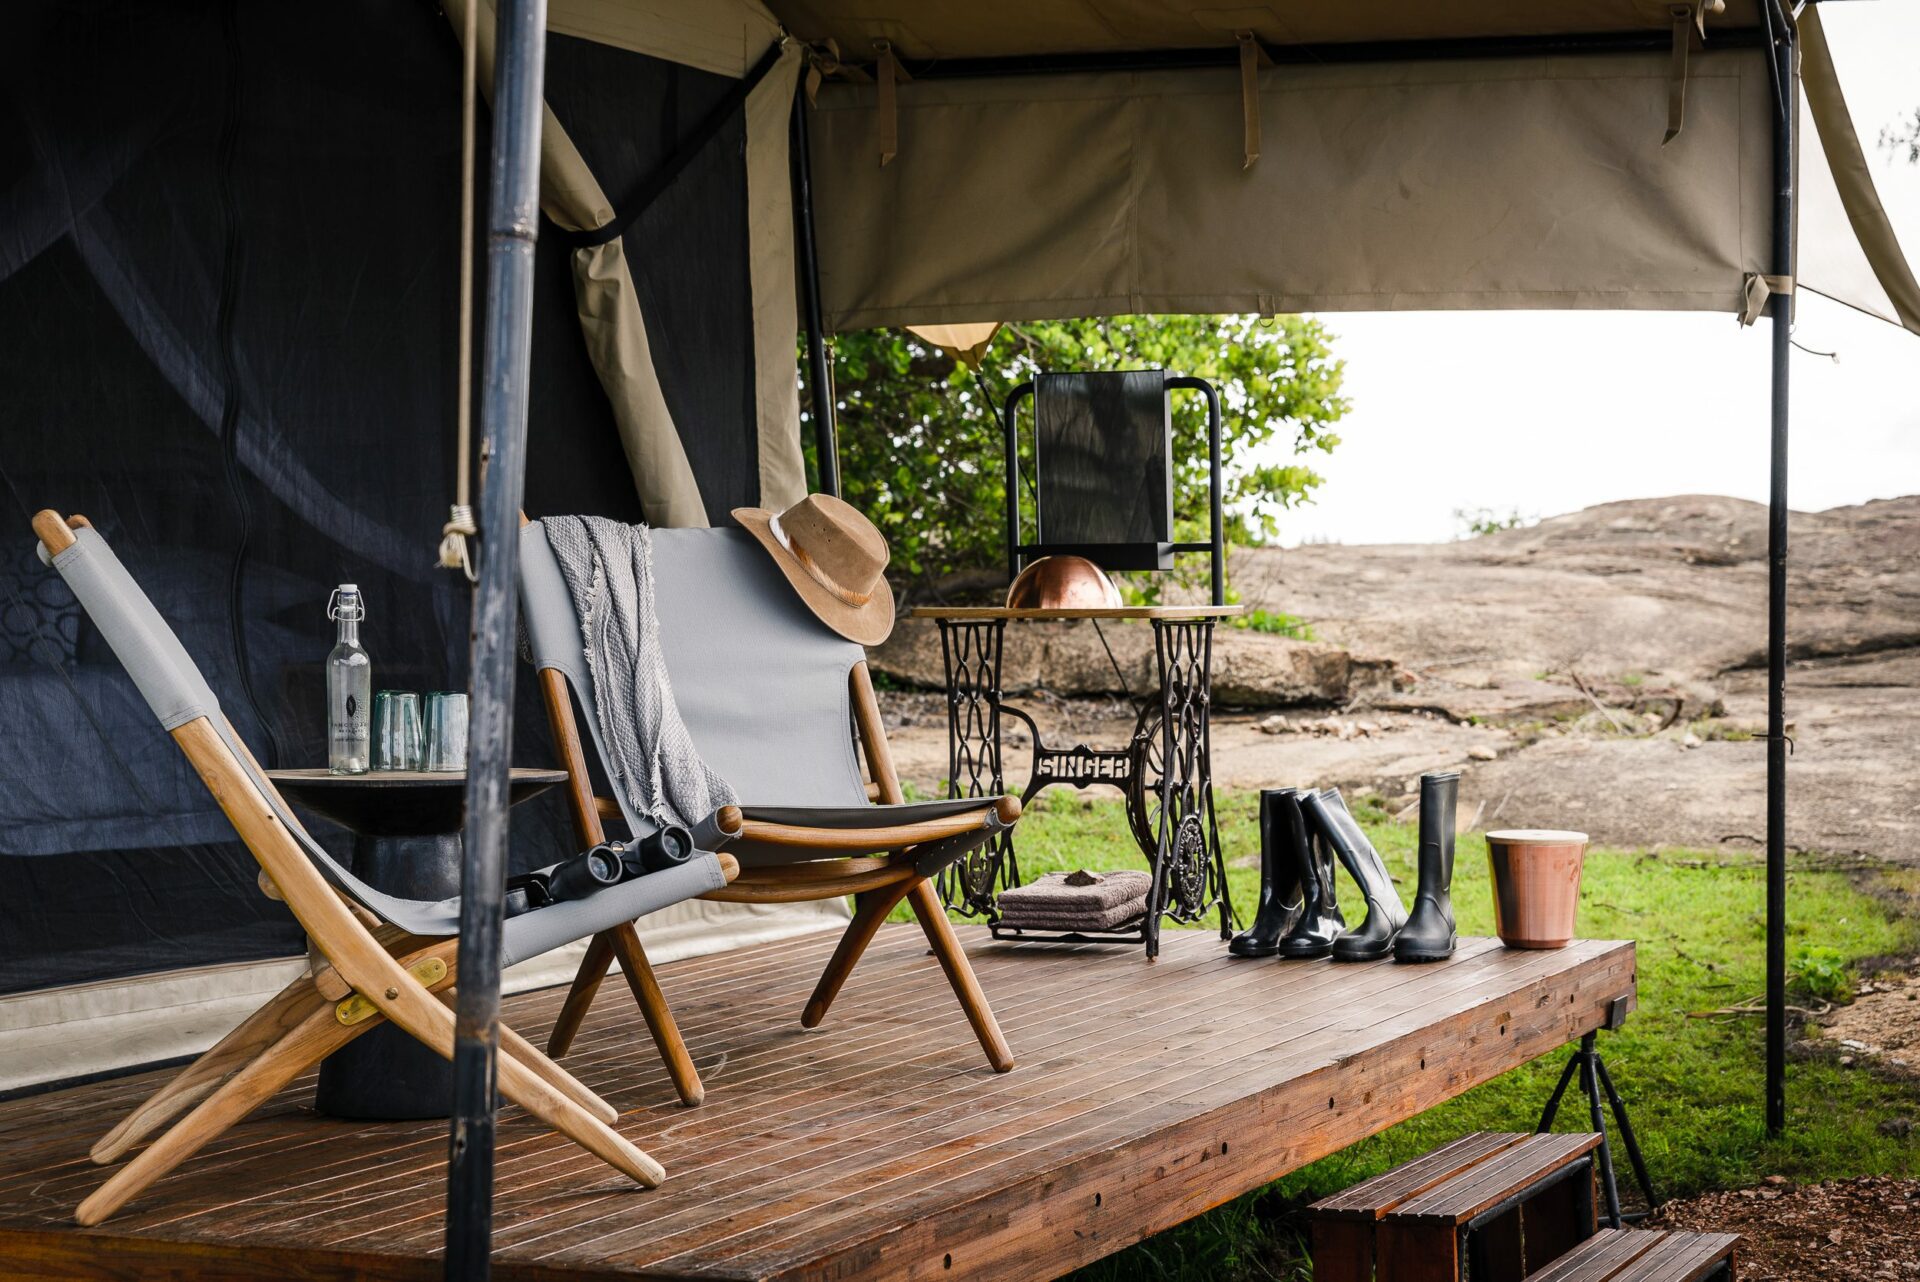 Finding the right safari tented camp means weighing options like verandah's and showers